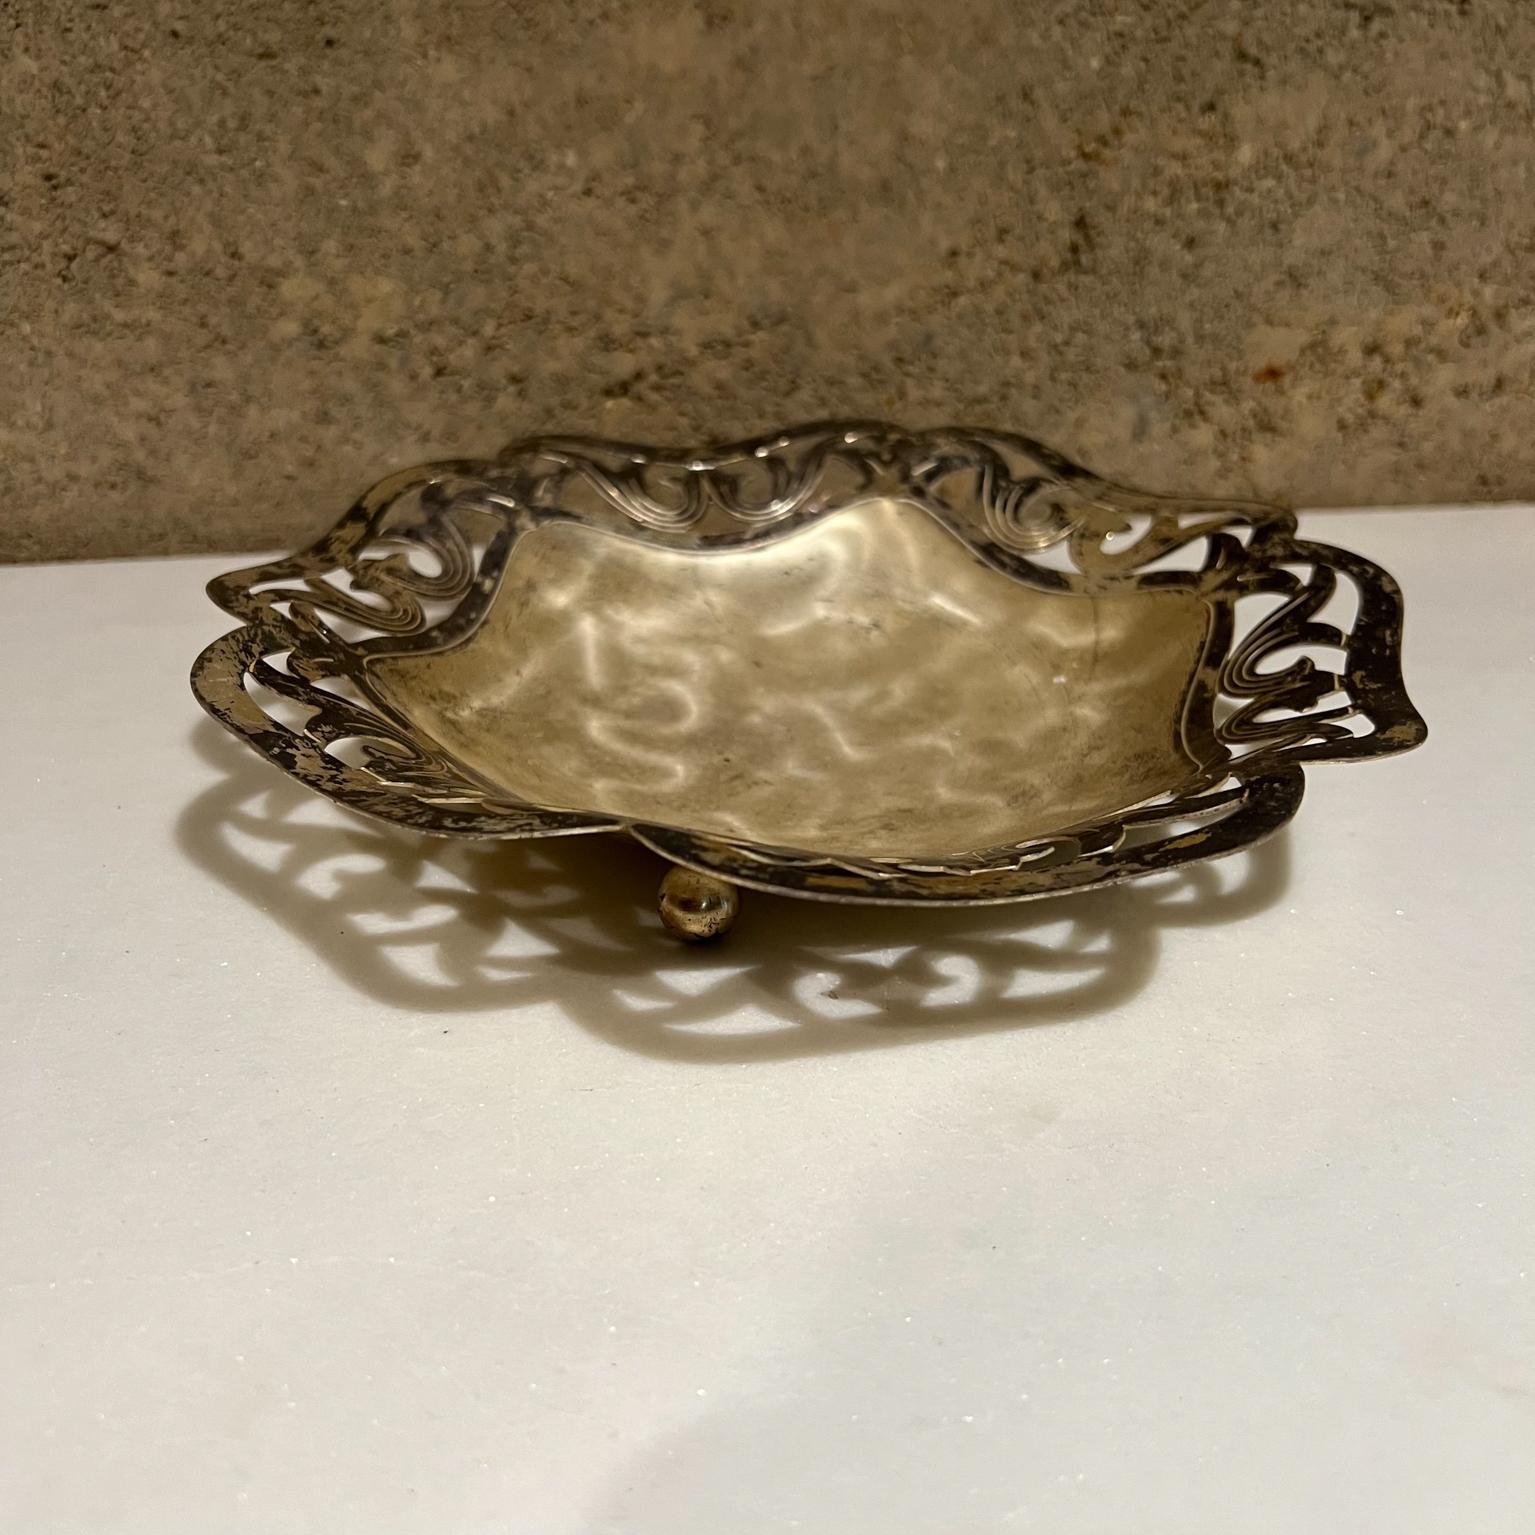 Vintage Silver plated Brass WMF Ikora serving candy dish Footed from Germany
Pretty scalloped filagree design
1.5 tall x 8 diameter
Maker stamped Ikora Germany E P Brass
Original unrestored vintage condition
Review images provided.

